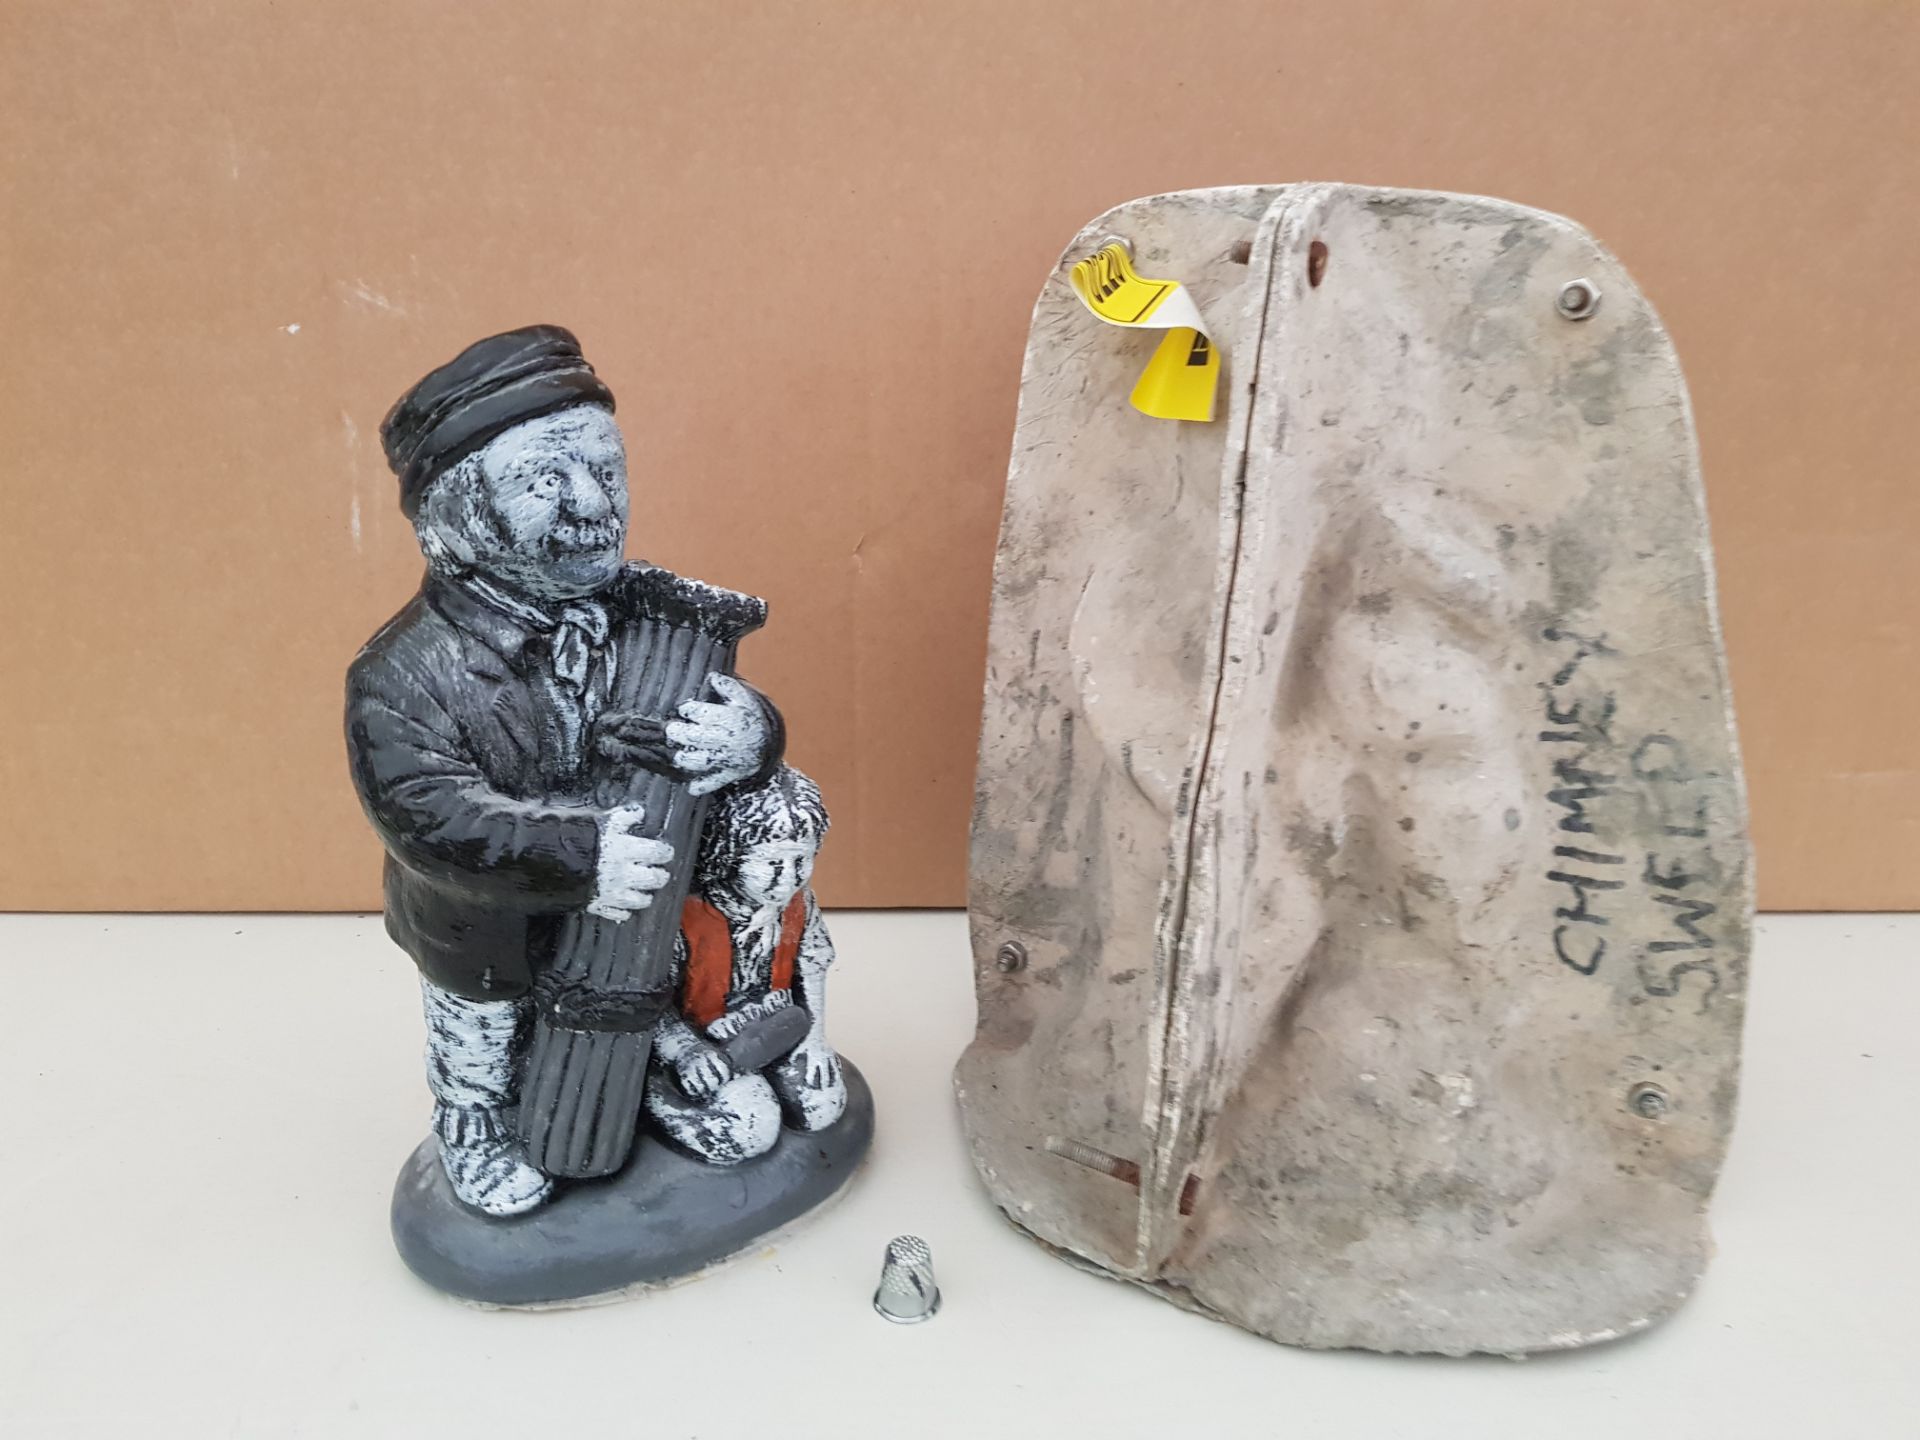 27CM CHIMNEY SWEEPER AND CHILD MASTER CAST WITH LATEX SLIP & FIBRE GLASS MOULD (FOR CASTING